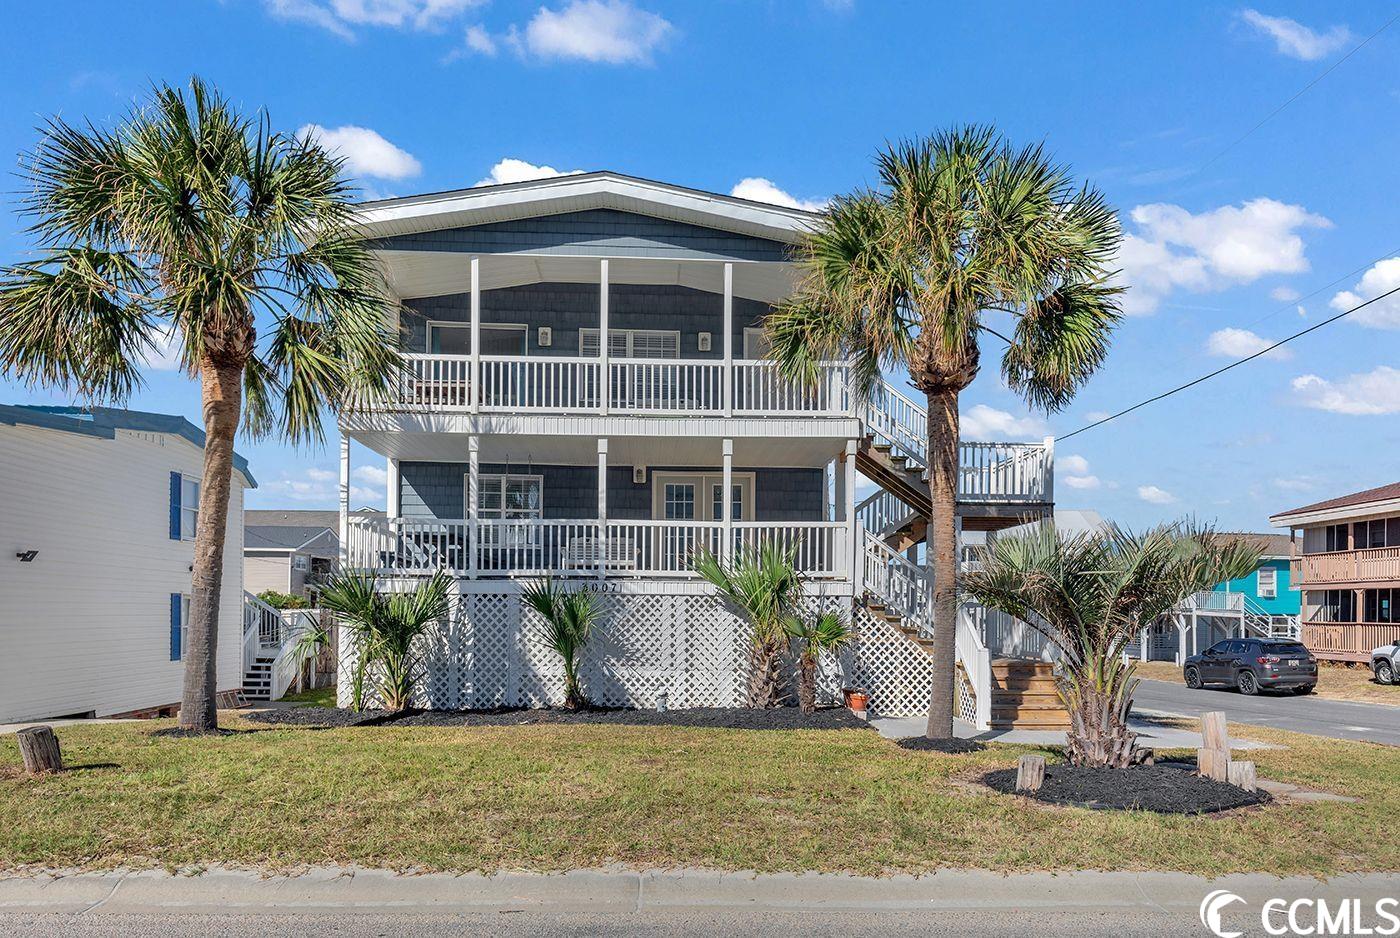 location is key!  second row raised beach cottage in the heart of the cherry grove section of north myrtle beach. the beach access is directly across the street and the home is within walking distance to shops, restaurants, beach bars, cherry grove pier and more! the home features 7 bedrooms and 4 full baths on 2 floors. there is a huge enclosed ground level space that features the laundry room and a shower along with a large storage area as well as parking. the plumbing for a full bath on the ground level has already been added. this comfortable raised beach home is laid out in a reverse floor plan with living spaces on both the first and second floor.  each floor walks out onto a large front porch each with a view of the ocean. the first floor features 4 bedrooms, the main living room with large flat screen tv and a large wet bar with sink and small refrigerator with extra counter space that flanks an entire wall. the second floor offers 3 more bedrooms, a fully equipped kitchen and dining room as well as the primary bedroom.  there is a huge enclosed ground level space that features the laundry room and a shower along with a large storage area as well as parking for the home. the plumbing for a full bath on the ground level has already been added. the cottage is directly across the street from the ocean where you can spend the day enjoying cherry grove’s renowned beach.  you are also a short walk to the salt marsh where you can fish for flounder and blue crab. once the day is done cap it off with fresh fish or steaks off the grill.   home is very well priced based upon the other active second row north myrtle beach homes and is priced below the tax assessed value.